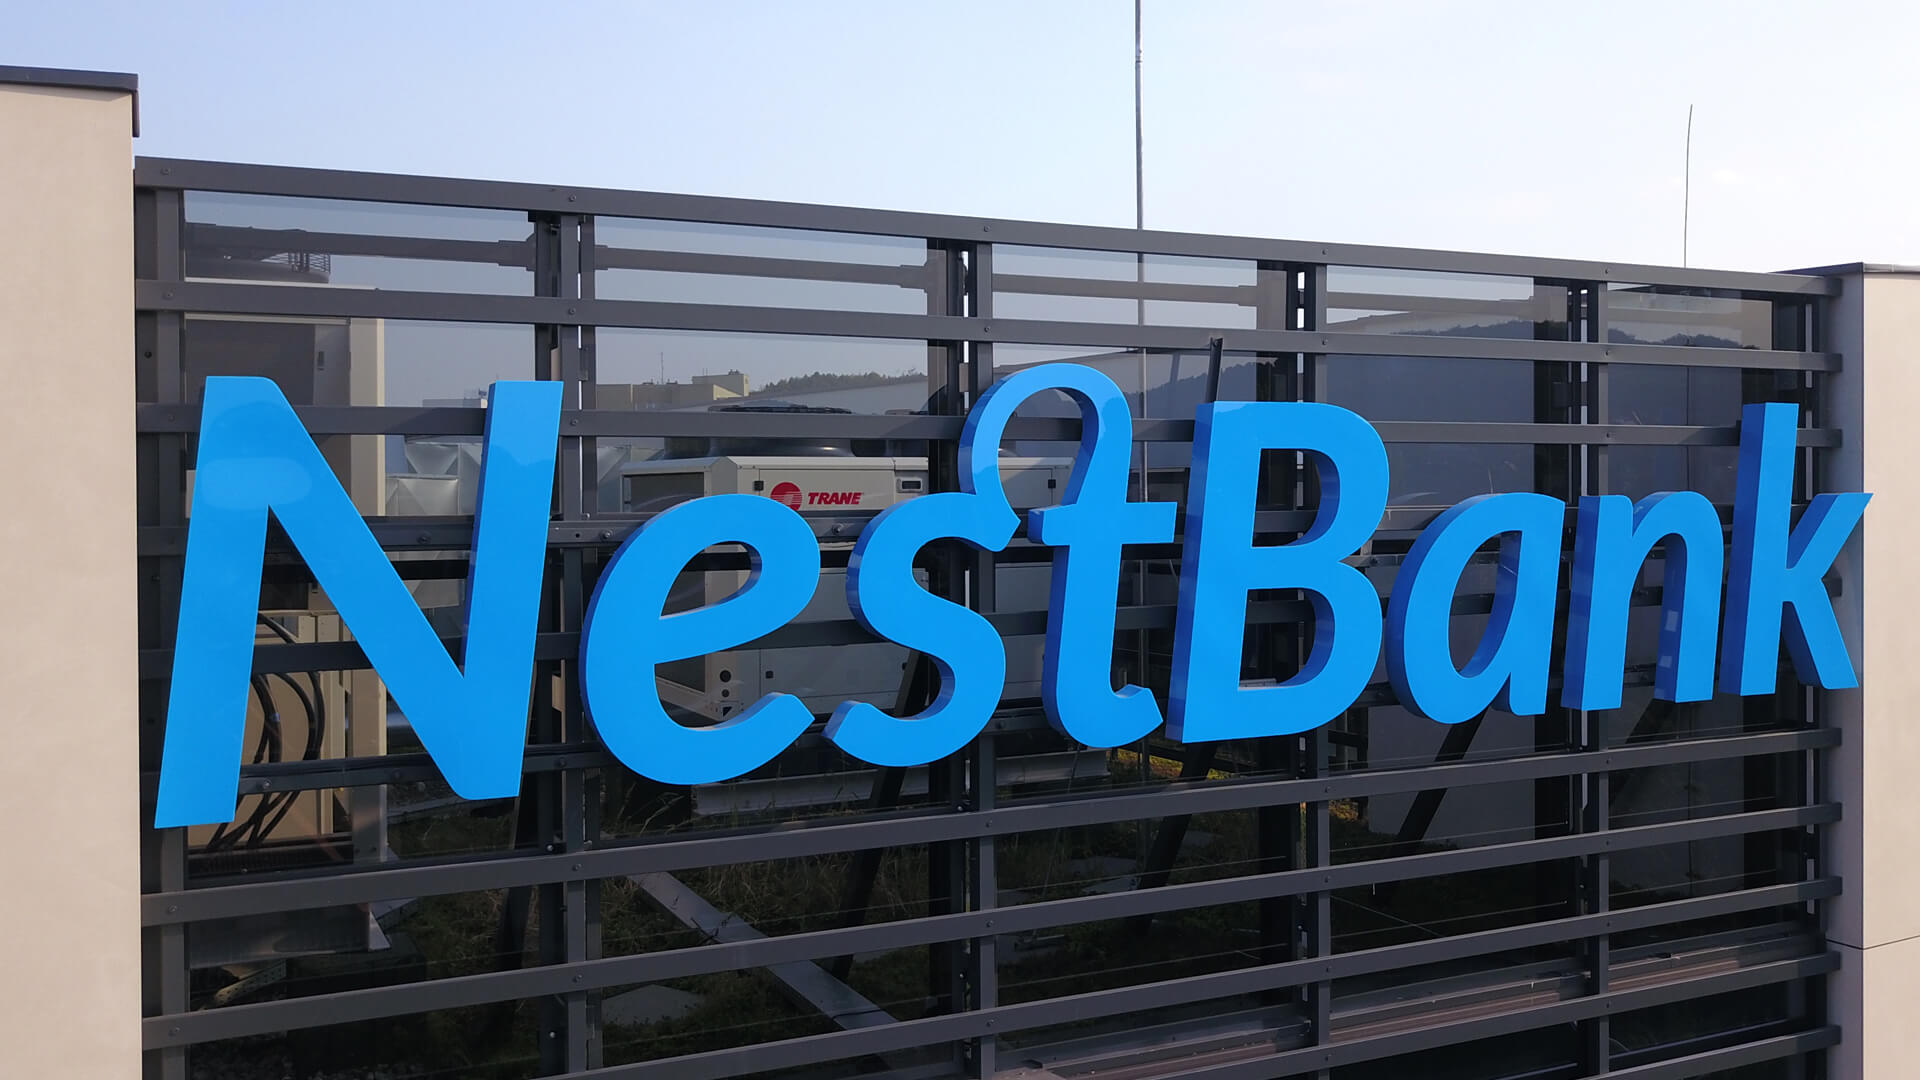 nestbank  - nestbank-3D-led-letters-bank-3d-chanel-letters-advertising-nest-bank-letters-3d-on-the-building-letters-nest-bank